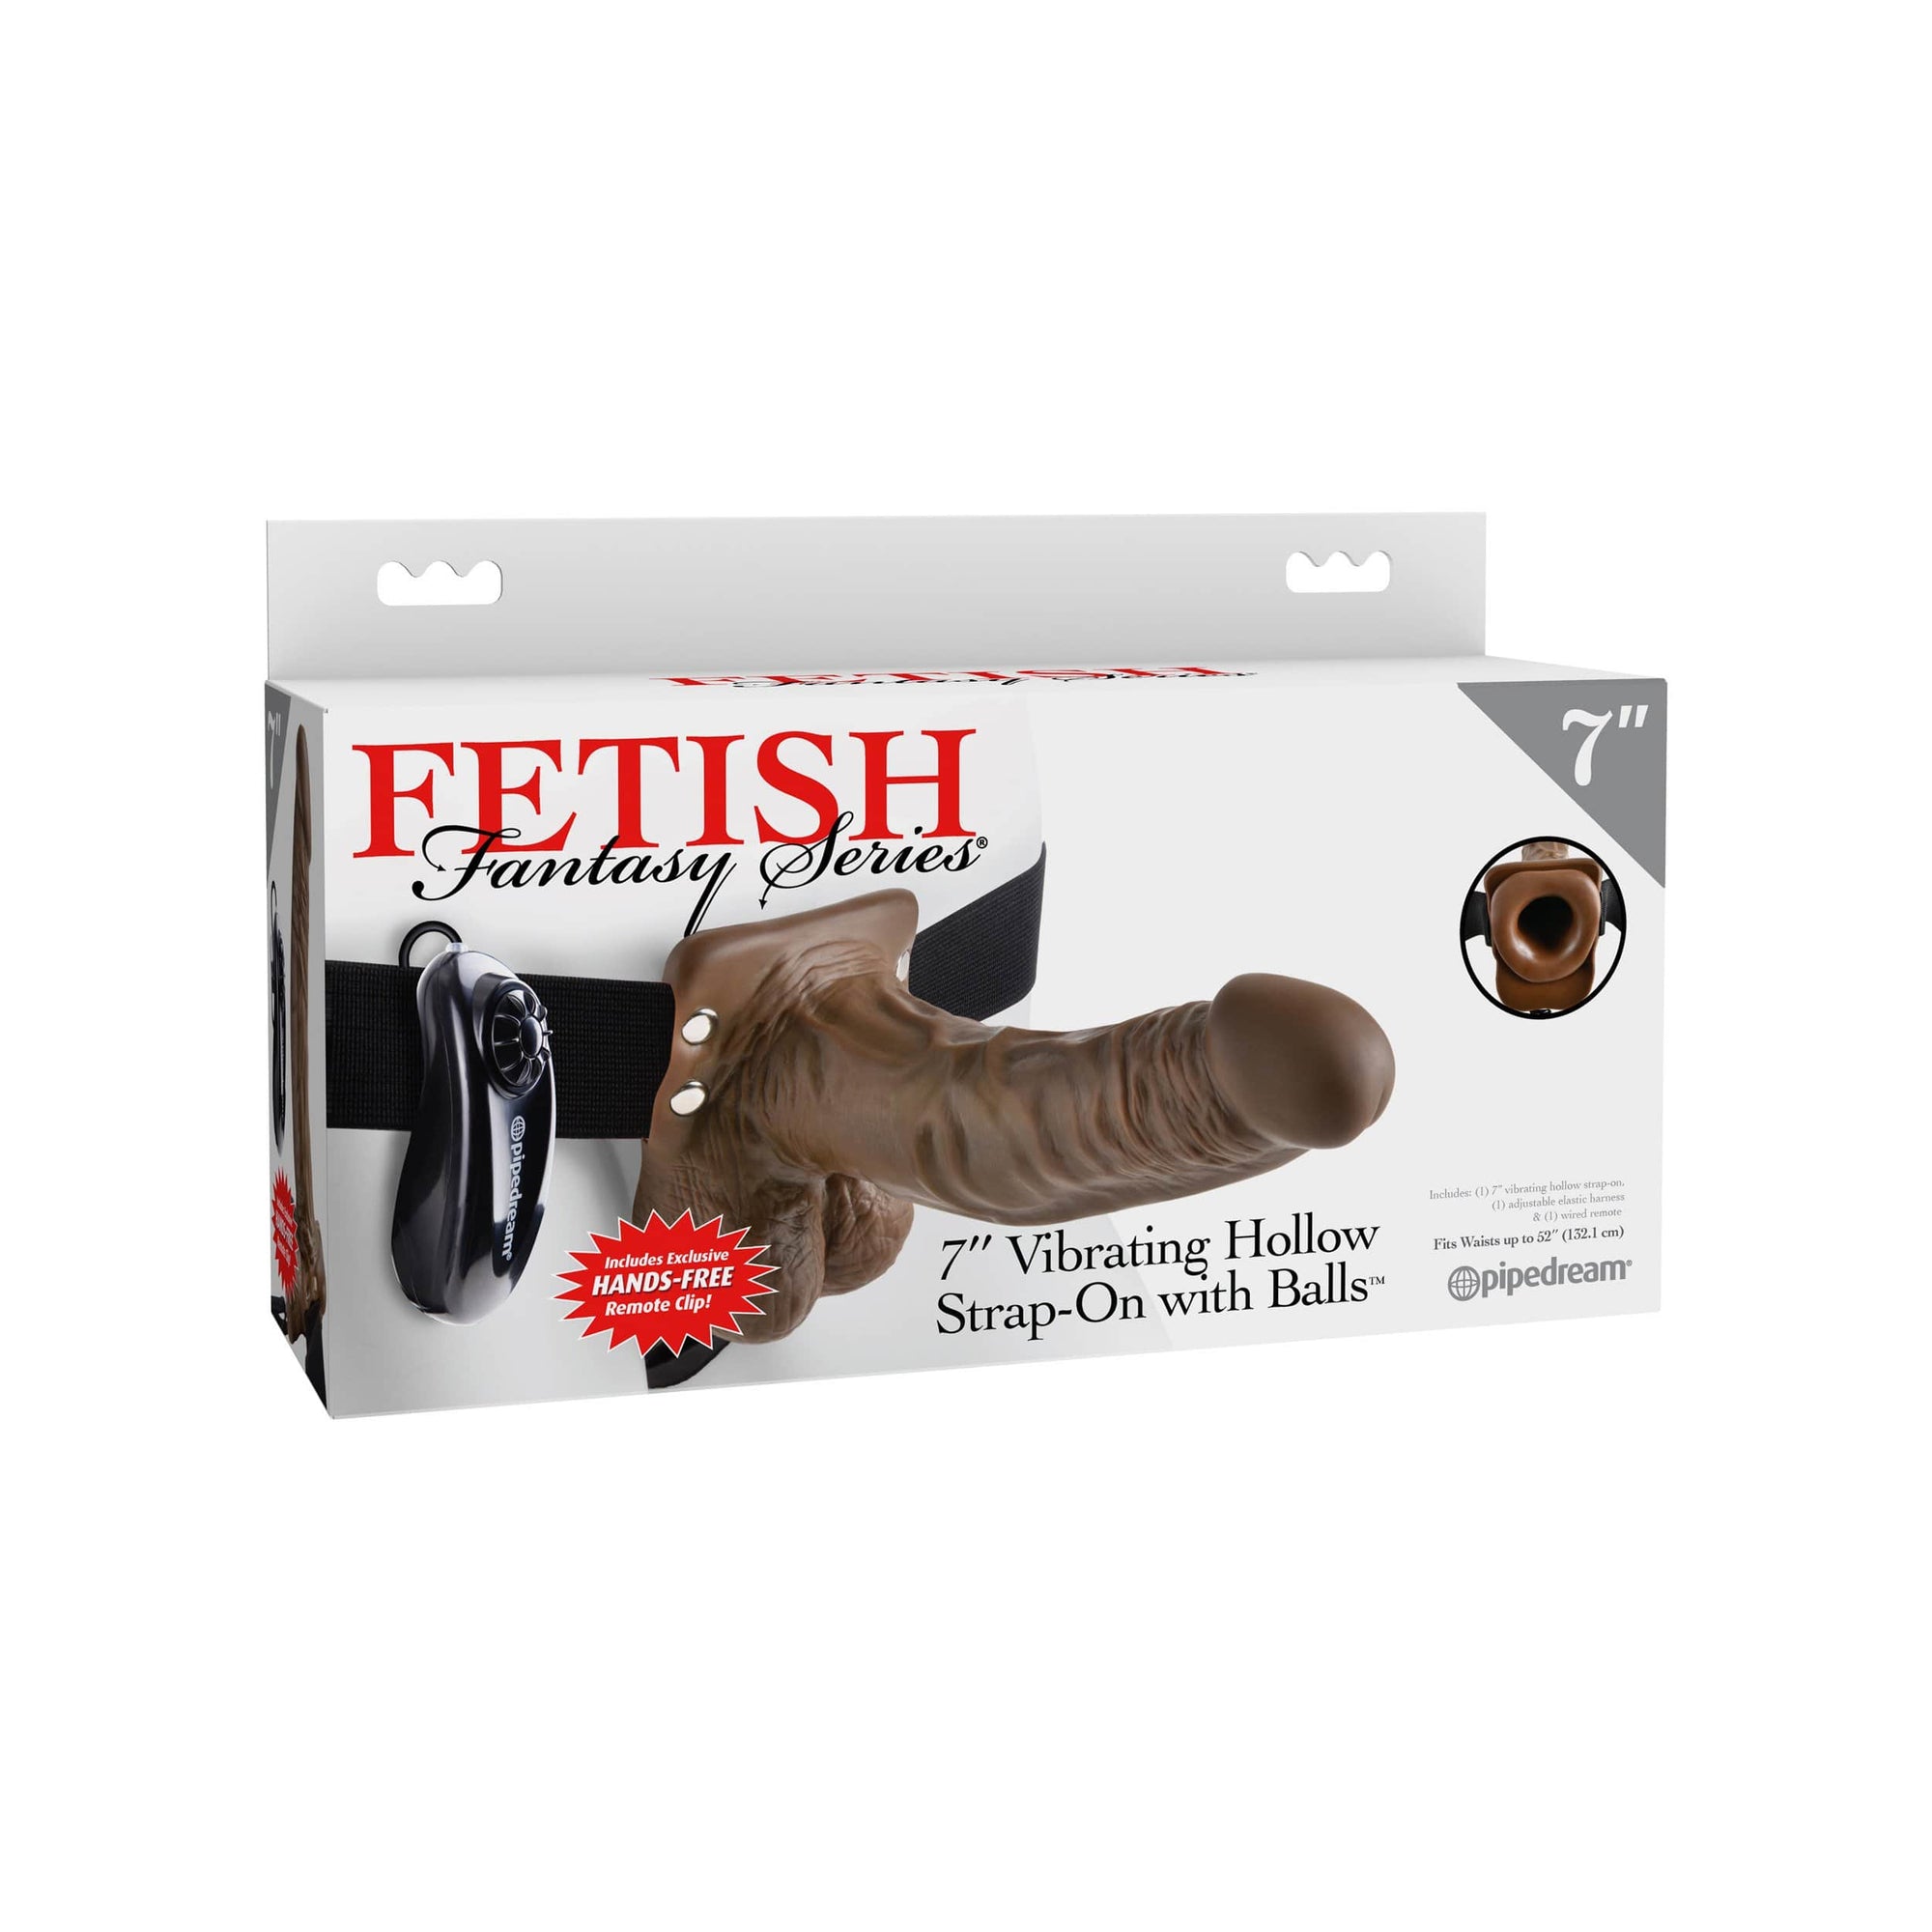 Pipedream - Fetish Fantasy Series Vibrating Hollow Strap-On with Balls 7" (Brown) Strap On with Hollow Dildo for Male (Vibration) Non Rechargeable 324171269 CherryAffairs